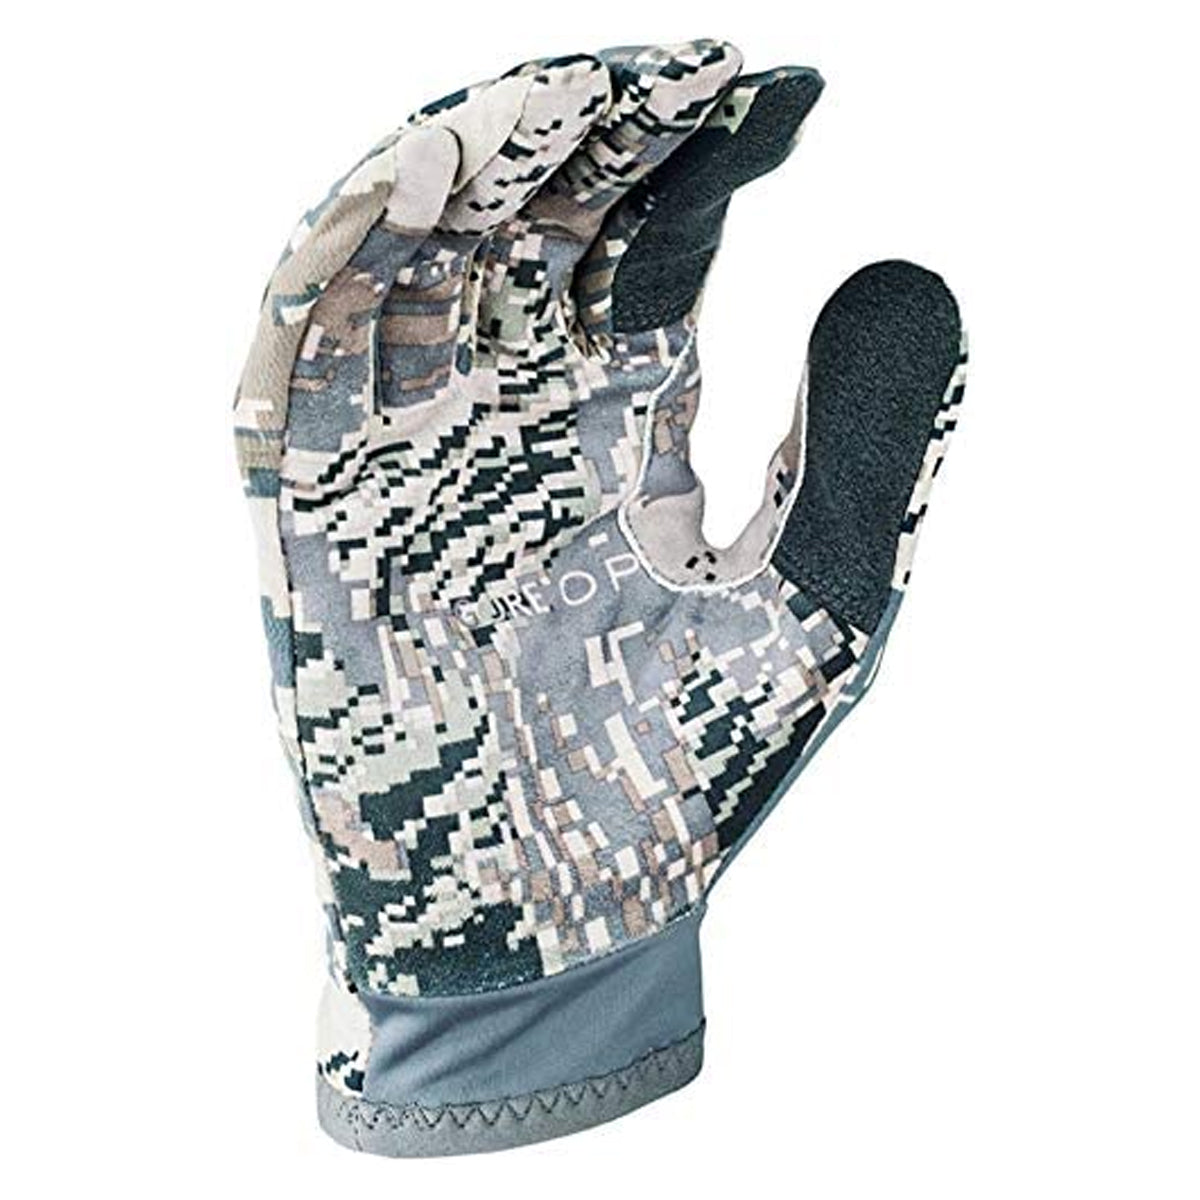 Sitka Ascent Glove in  by GOHUNT | Sitka - GOHUNT Shop